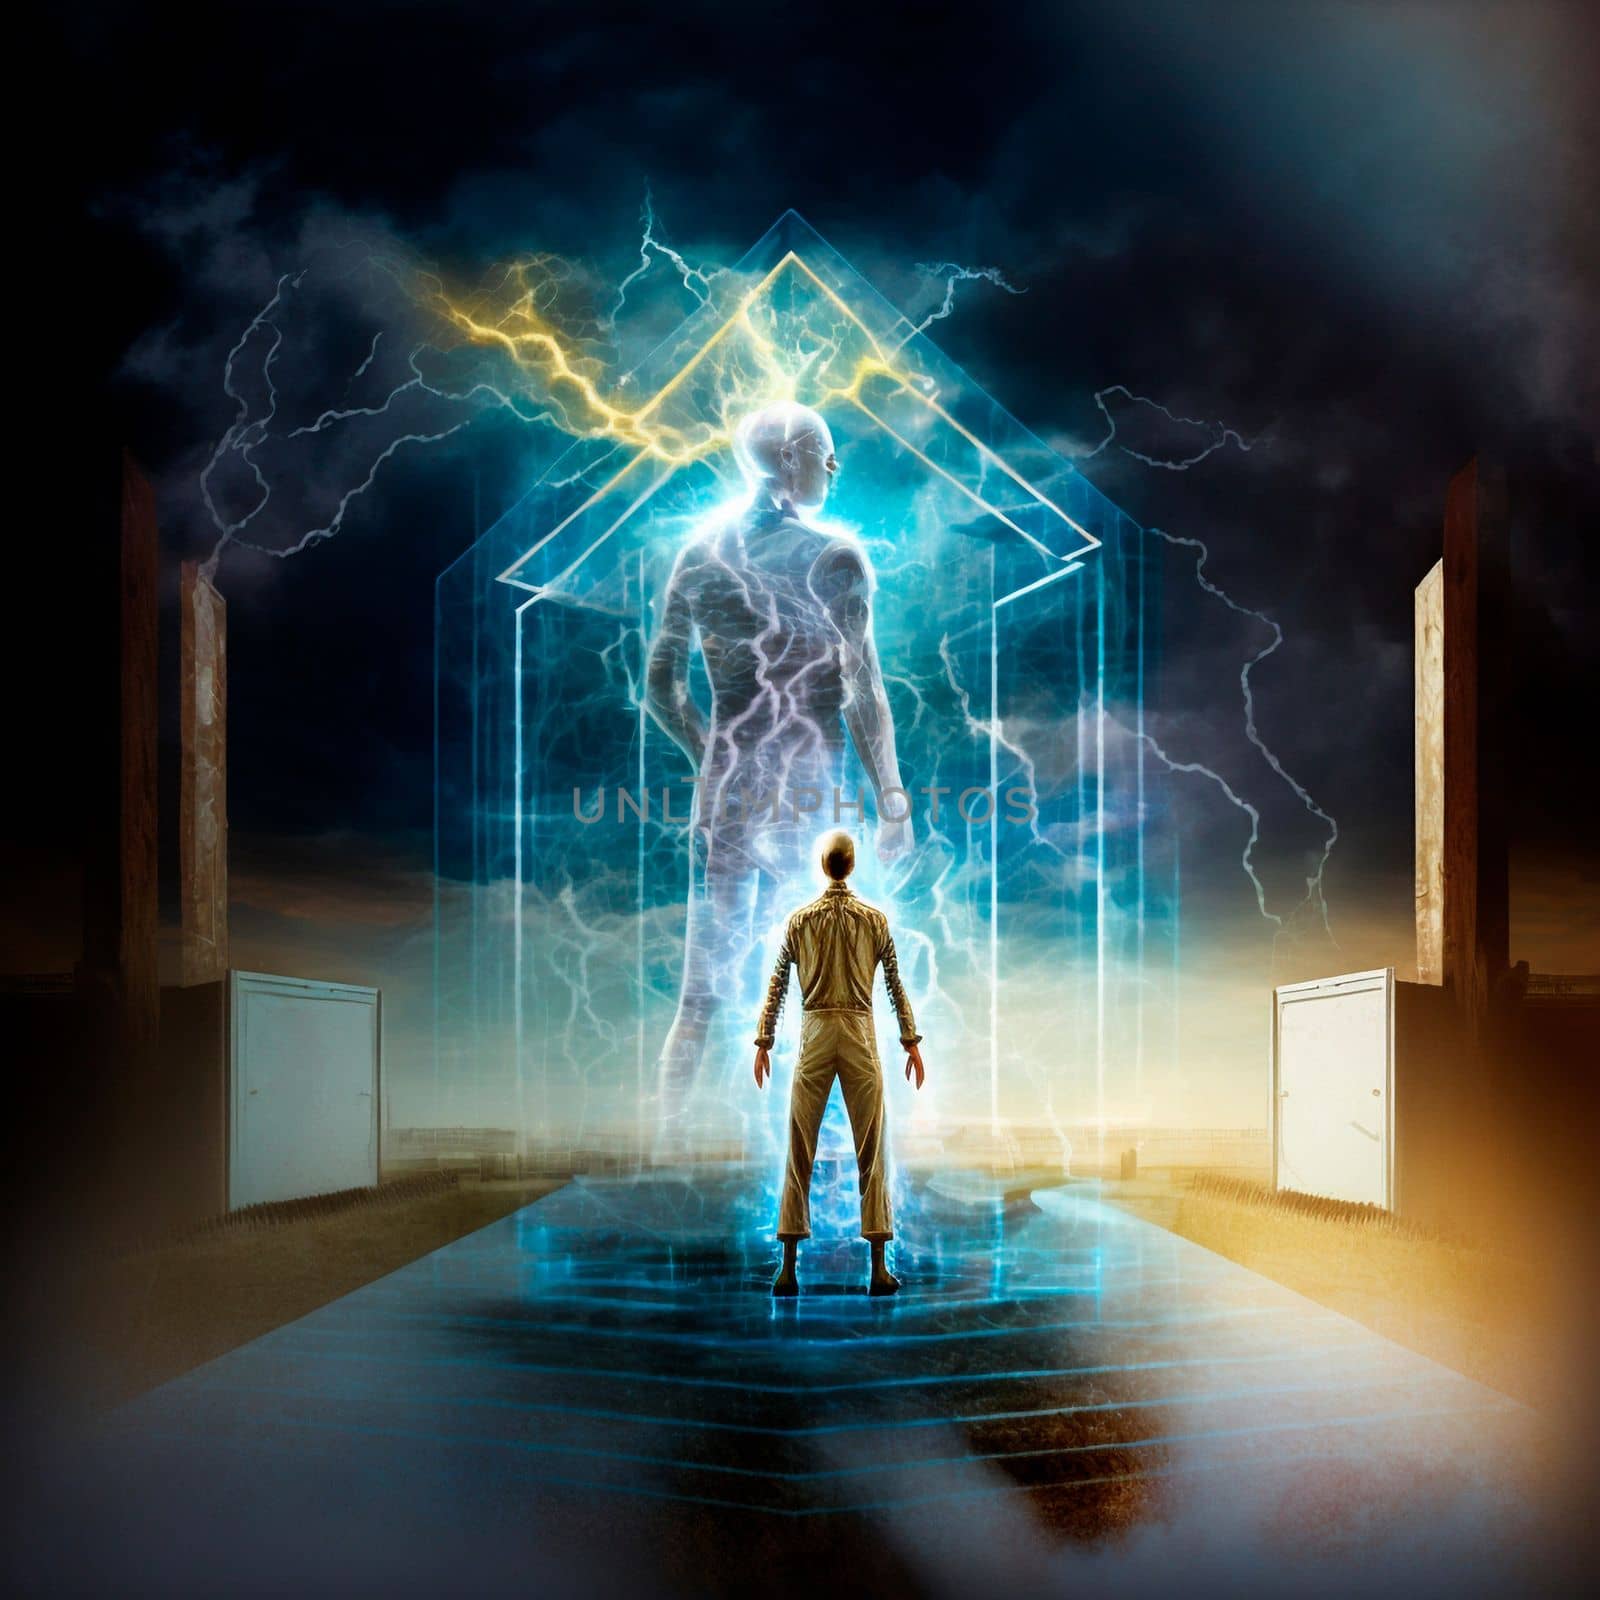 human holography, glow, becoming stronger, insight. High quality illustration